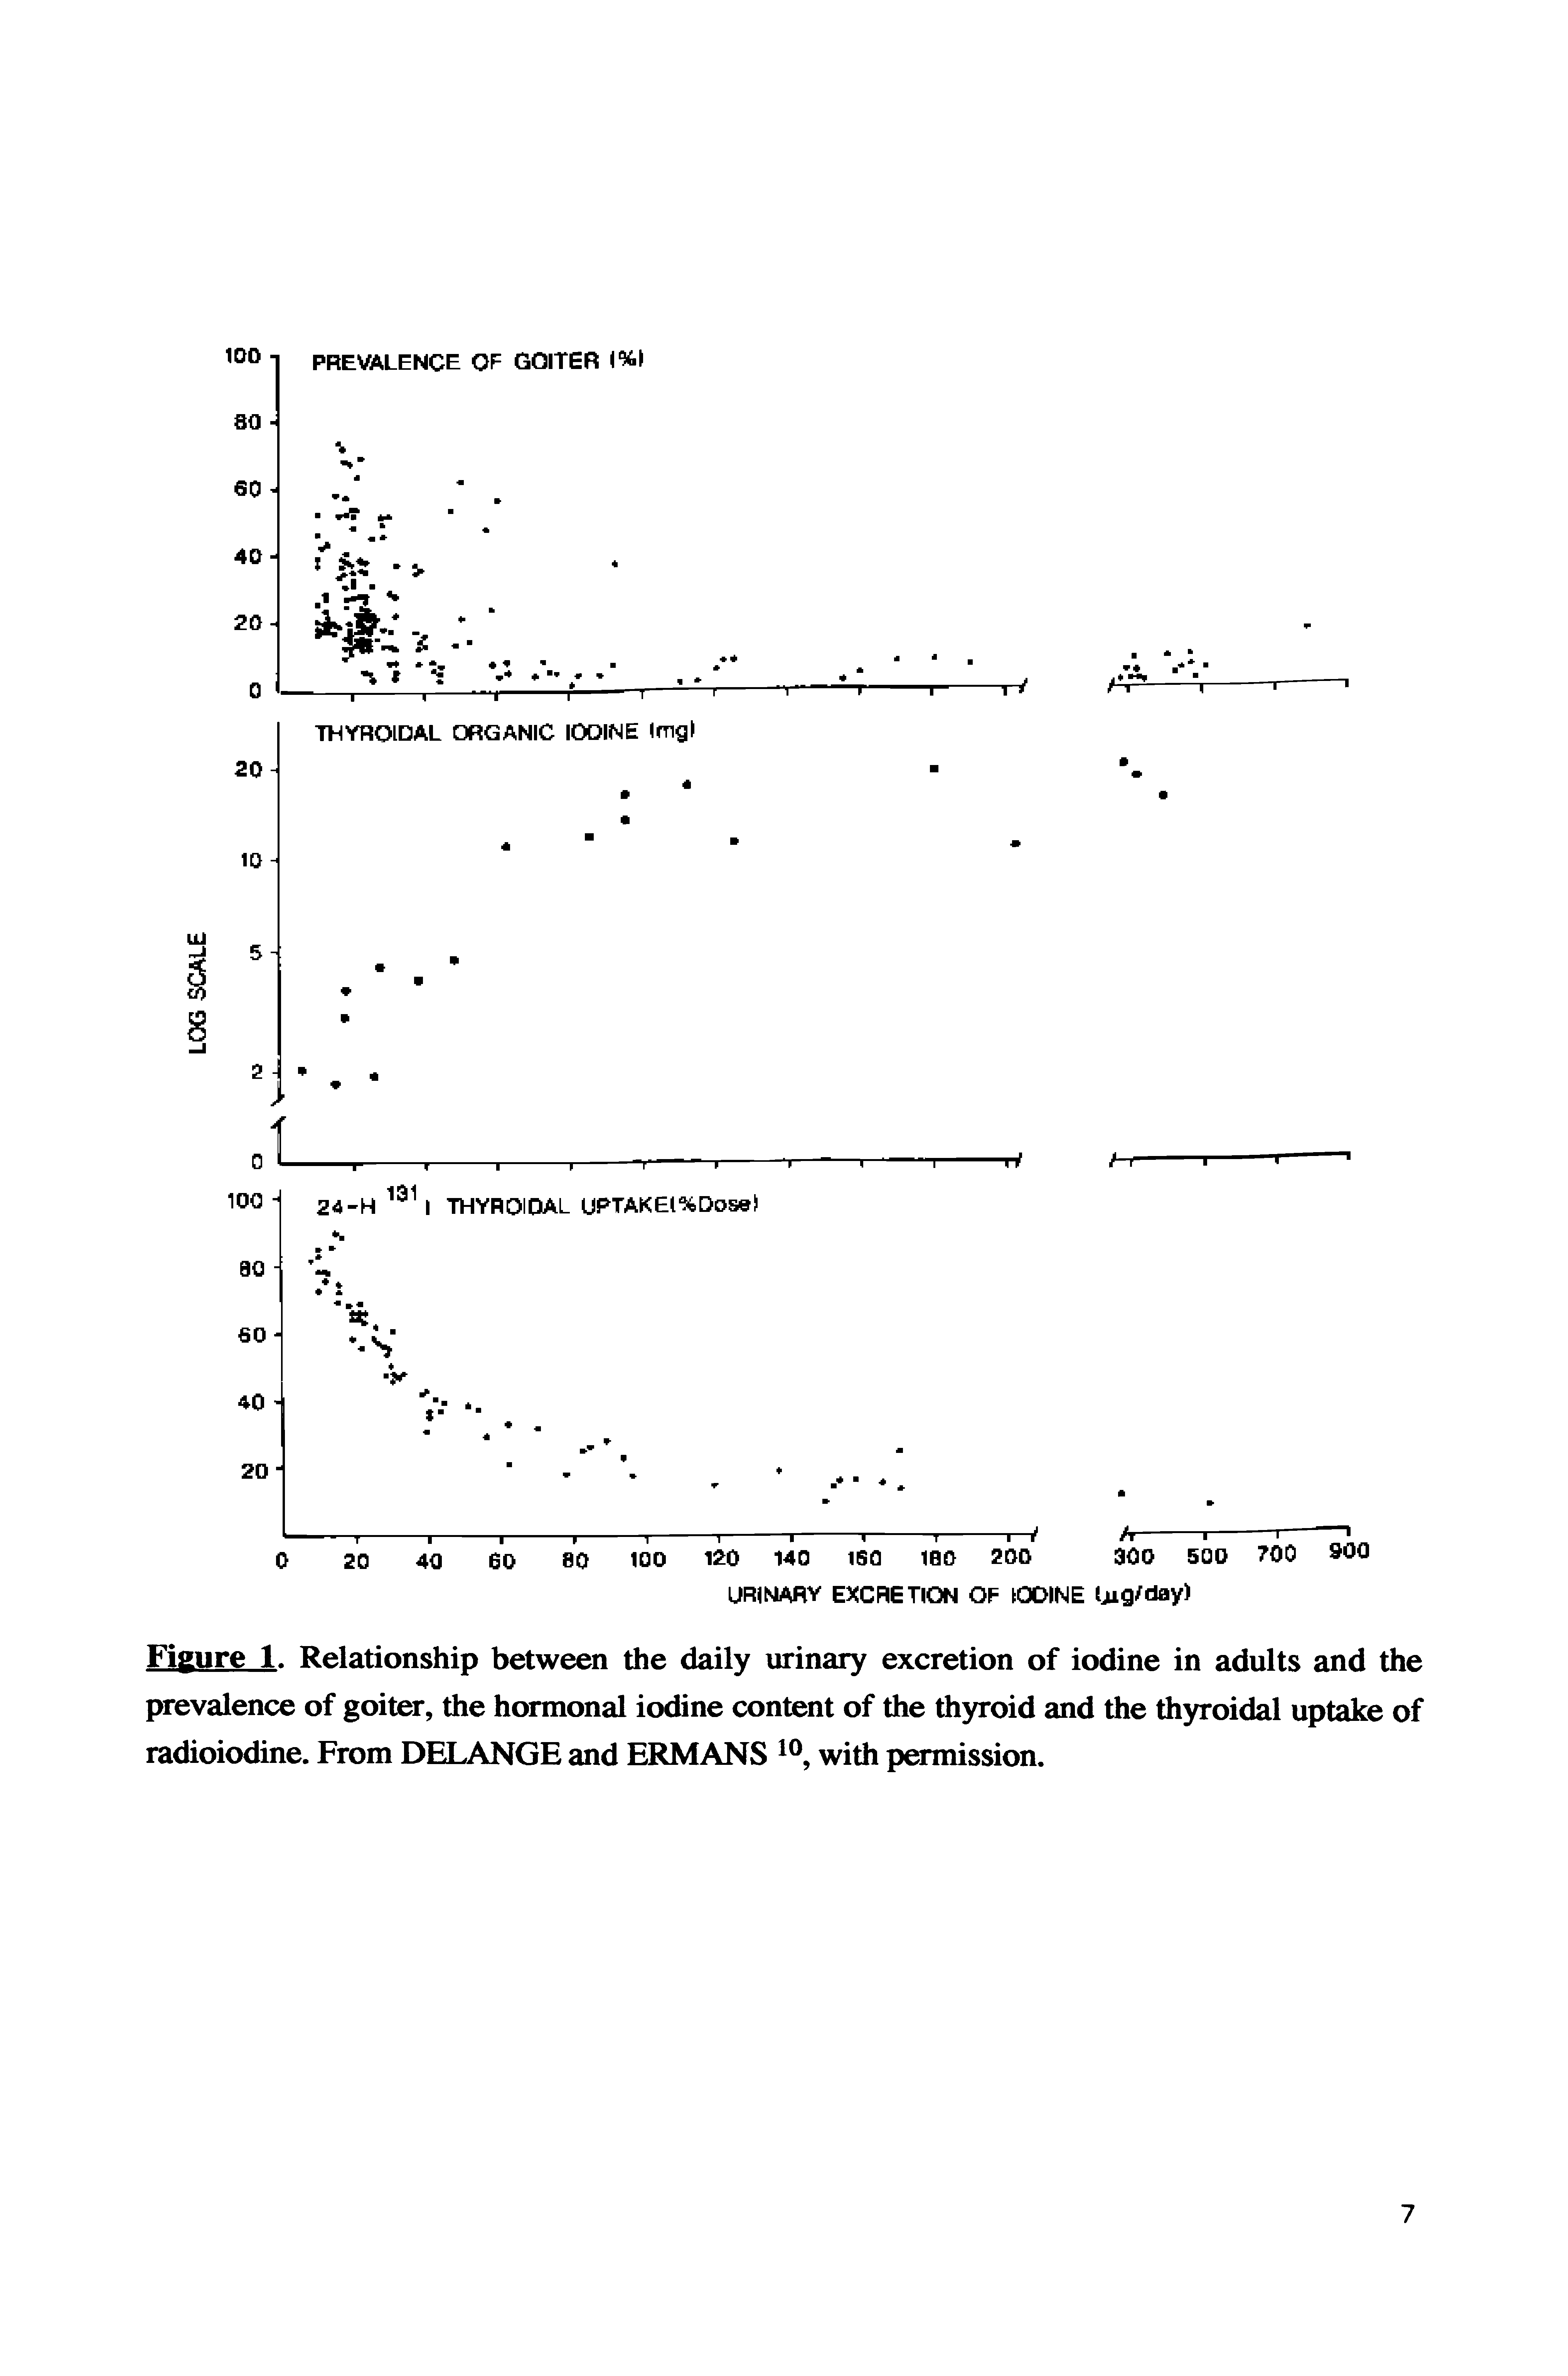 Figure 1. Relationship between the daily urinary excretion of iodine in adults and the prevalence of goiter, the hormonal iodine content of the thyroid and the thyroidal uptake of radioiodine. From DELANGE and ERMANS with permission.